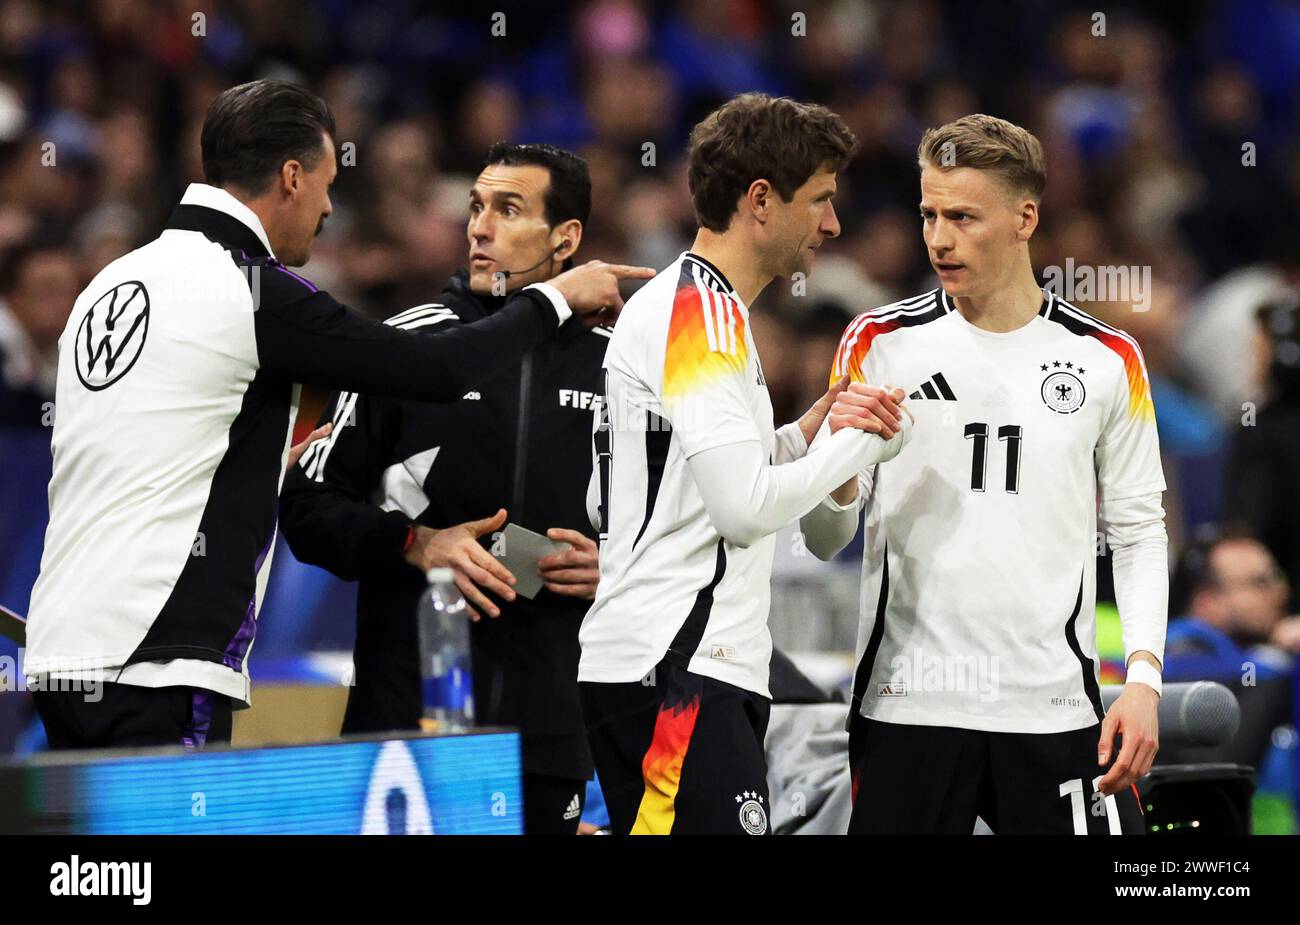 Lyon, France. 23rd Mar, 2024. Soccer: International match, France - Germany, Groupama Stadium. Germany players Chris Führich (r) and Thomas Müller (2nd from right) prepare for their substitution. Credit: Christian Charisius/dpa/Alamy Live News Stock Photo